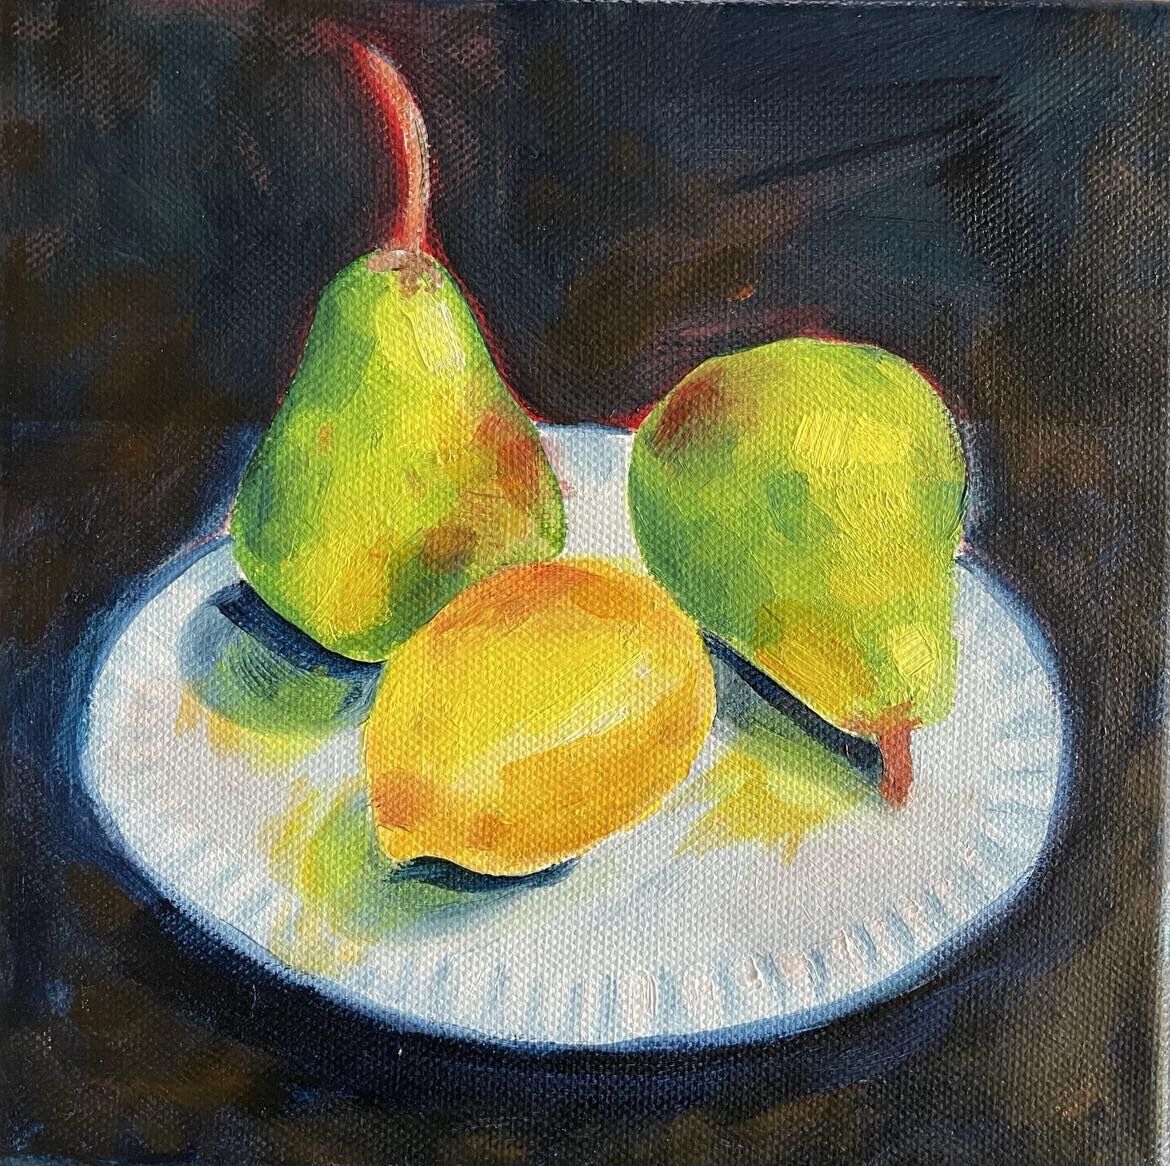 Two pears and one lemon